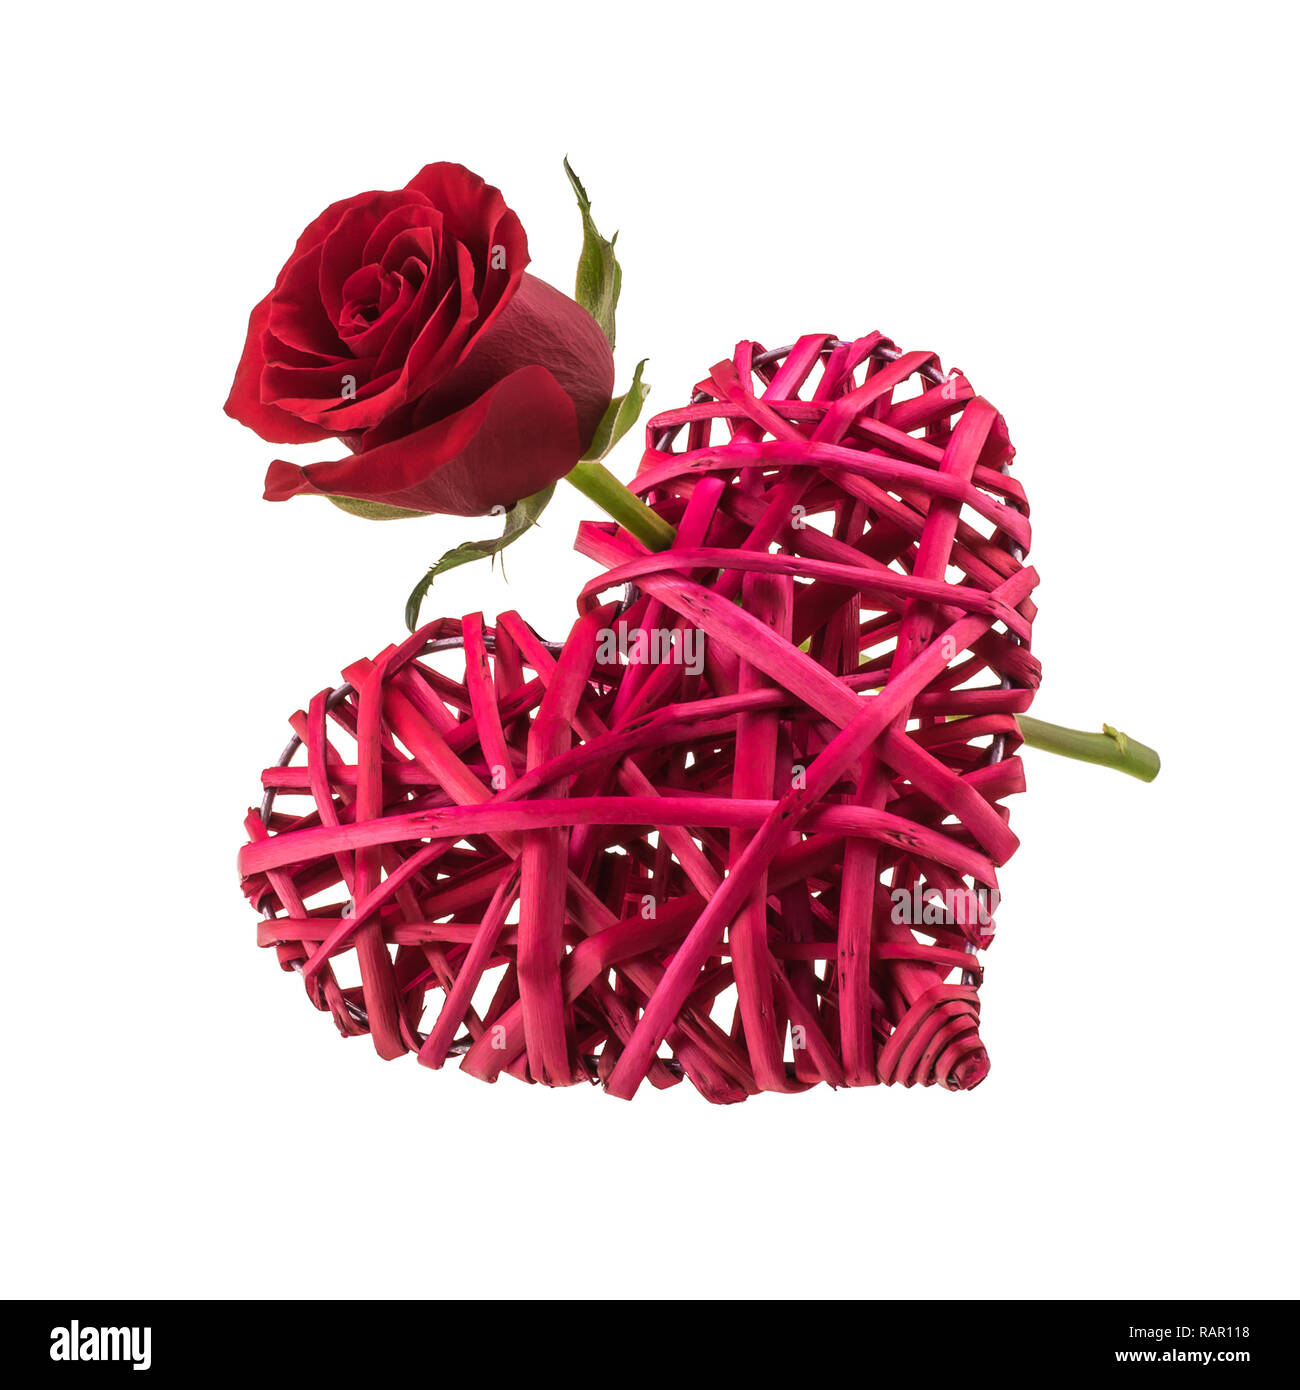 Wicker heart pierced with a red rose Stock Photo